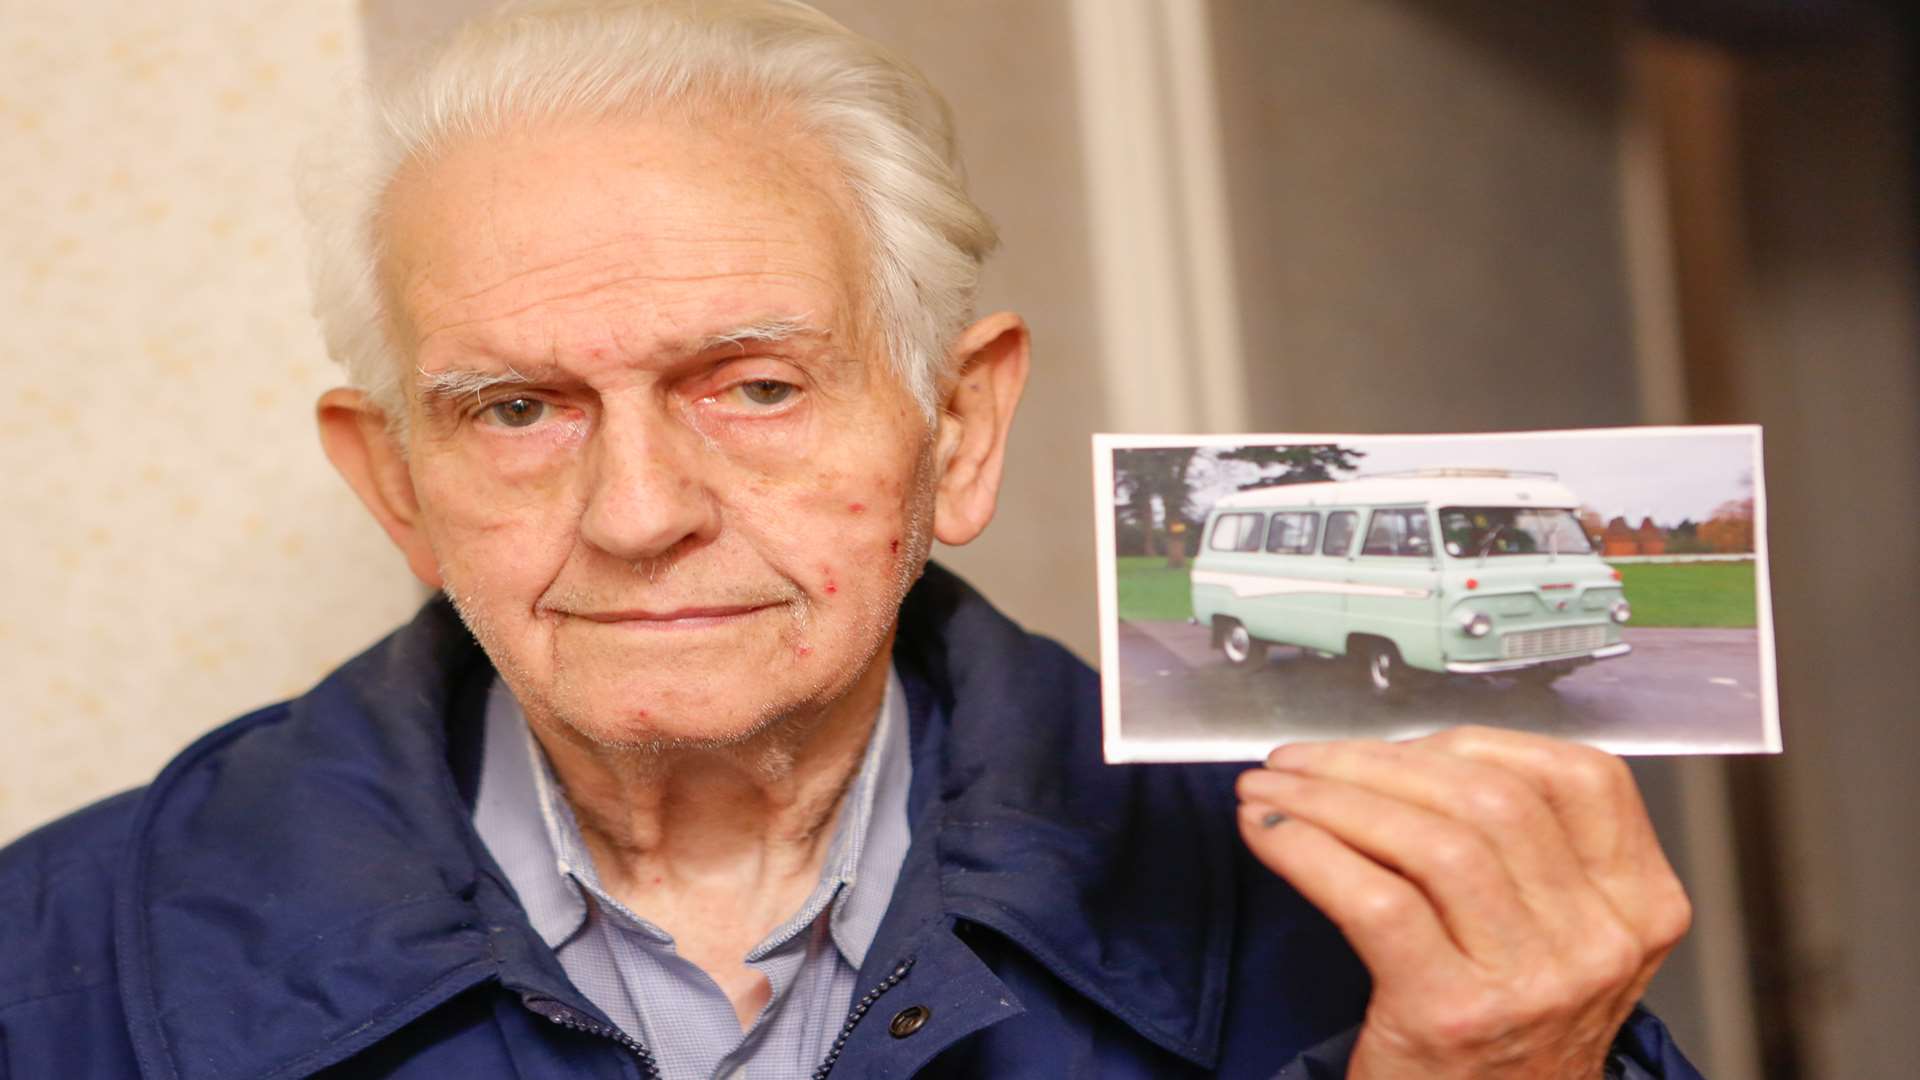 John Farrer, who has had his 1964 Ford Thames dormobile stolen from his Ditton driveway